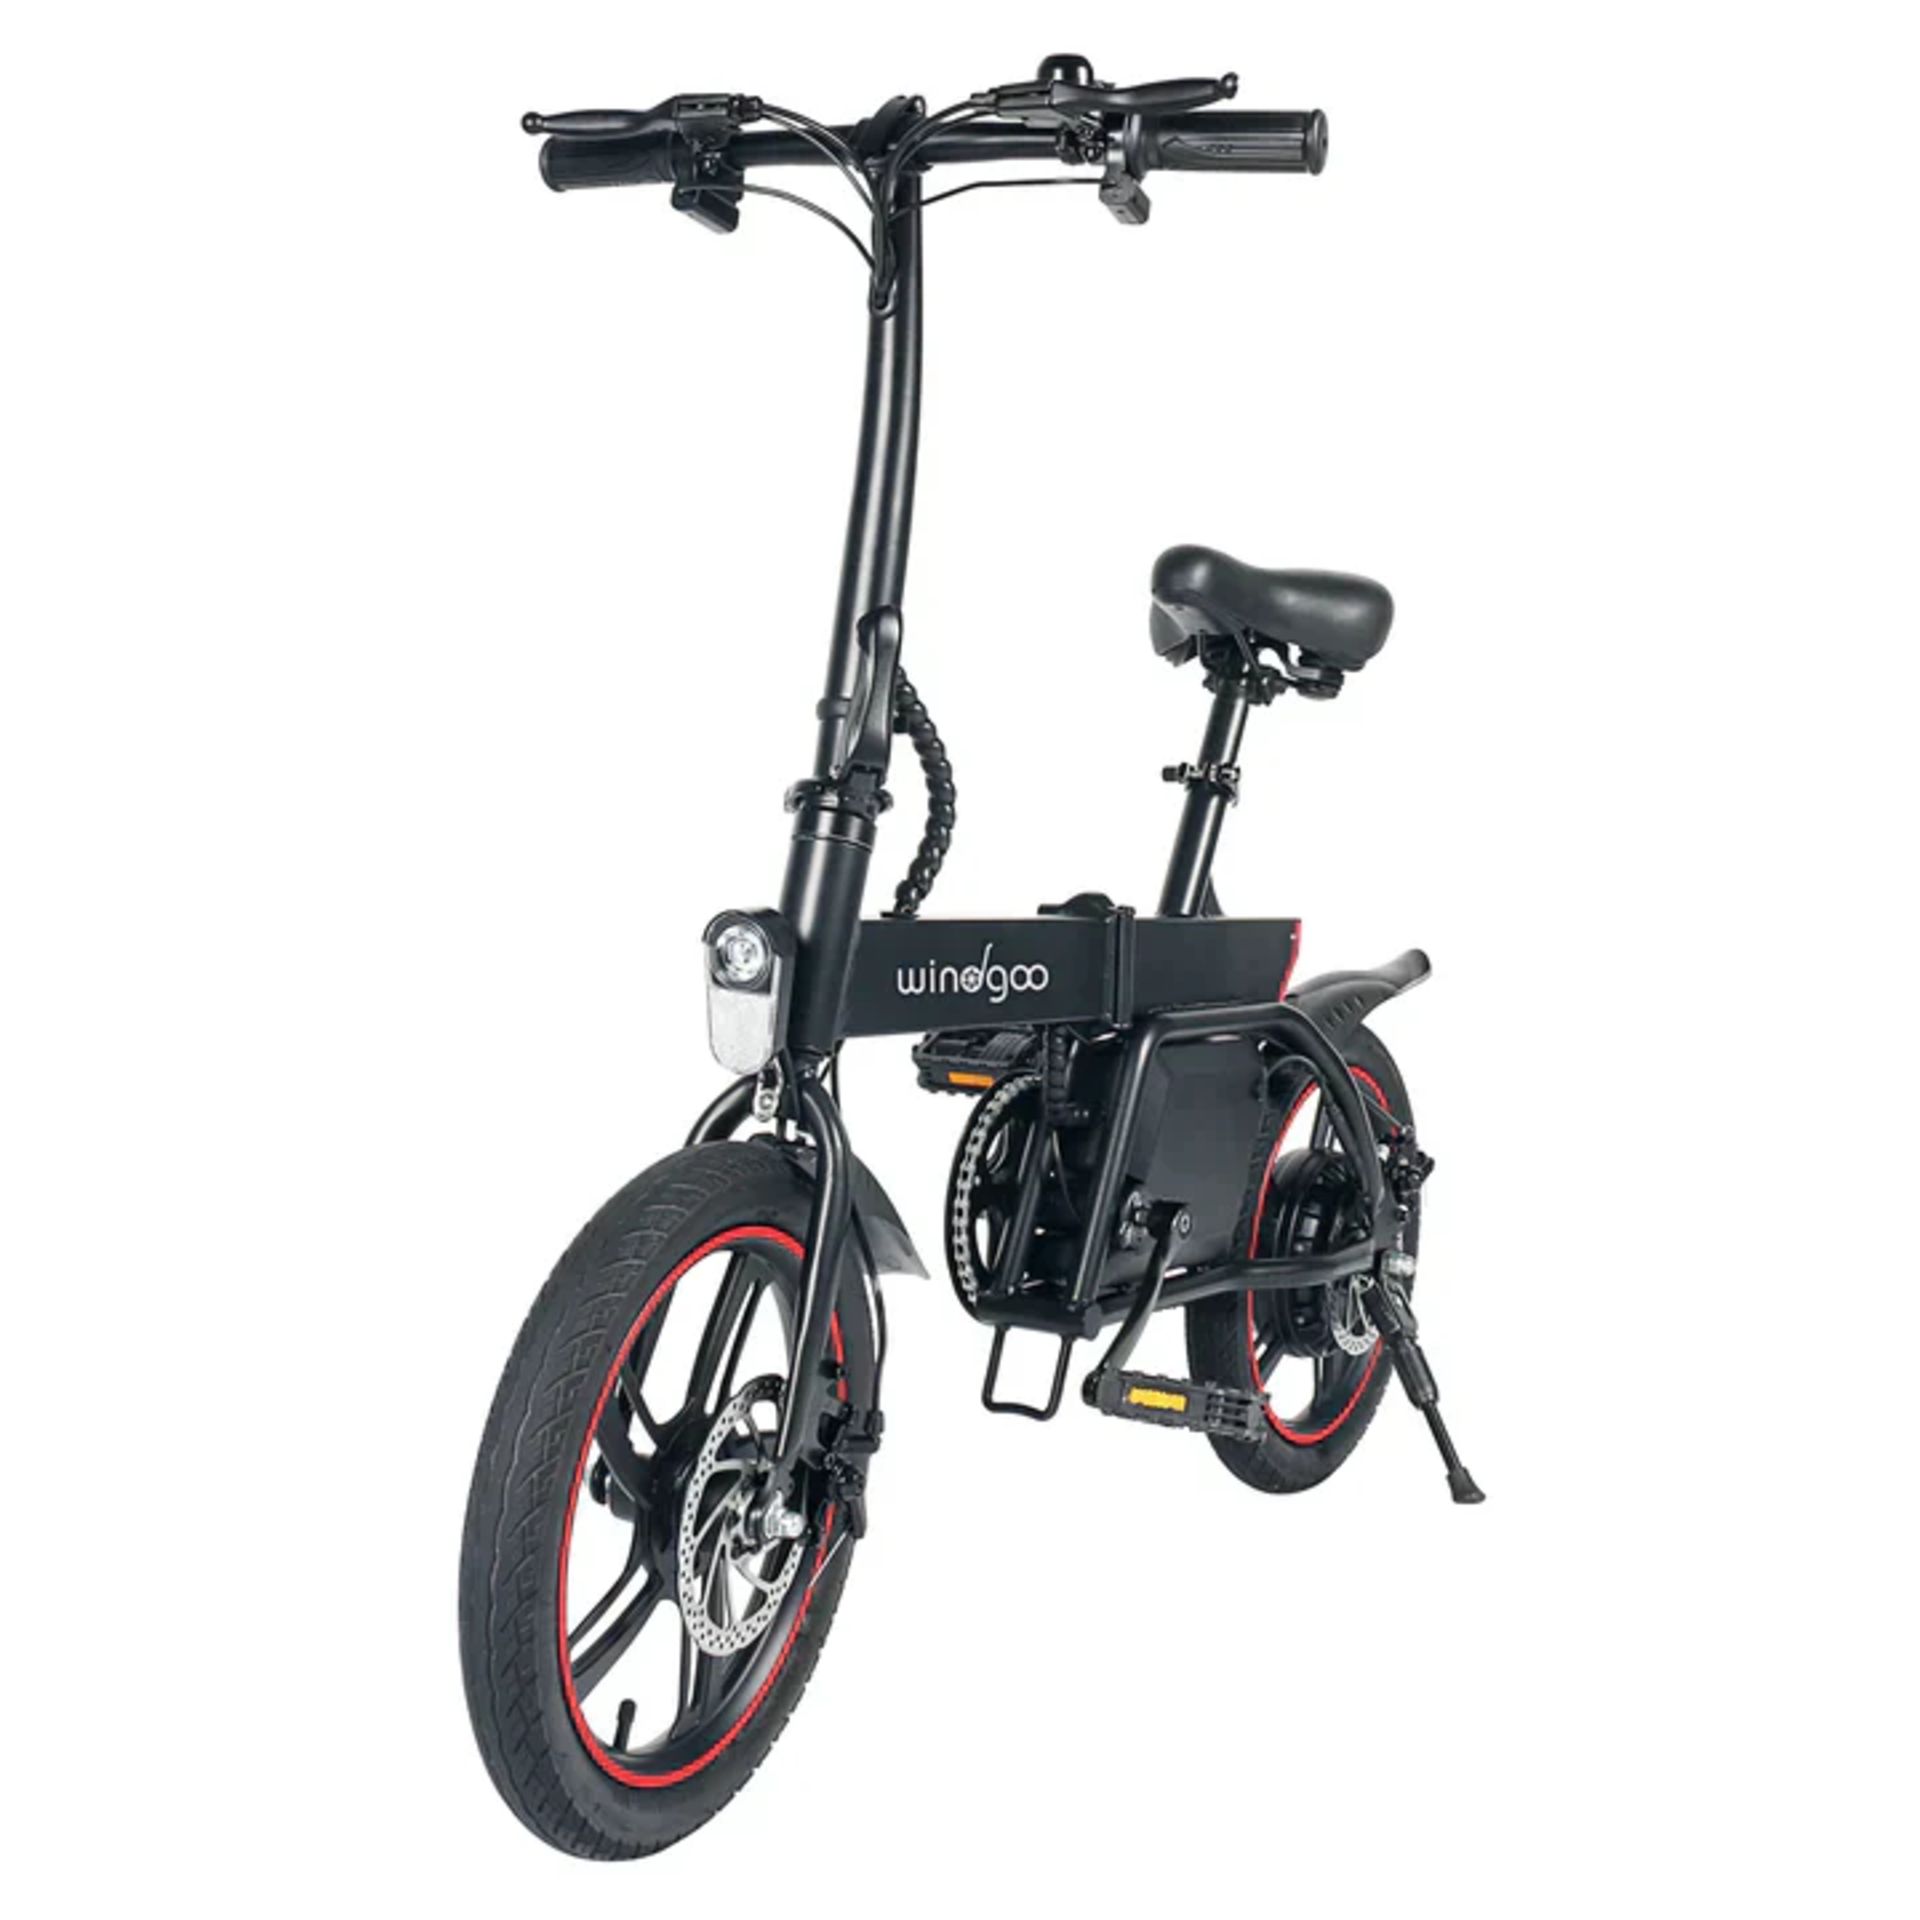 5 X Windgoo B20 Pro Electric Bike. RRP £1,100.99. With 16-inch-wide tires and a frame of upgraded